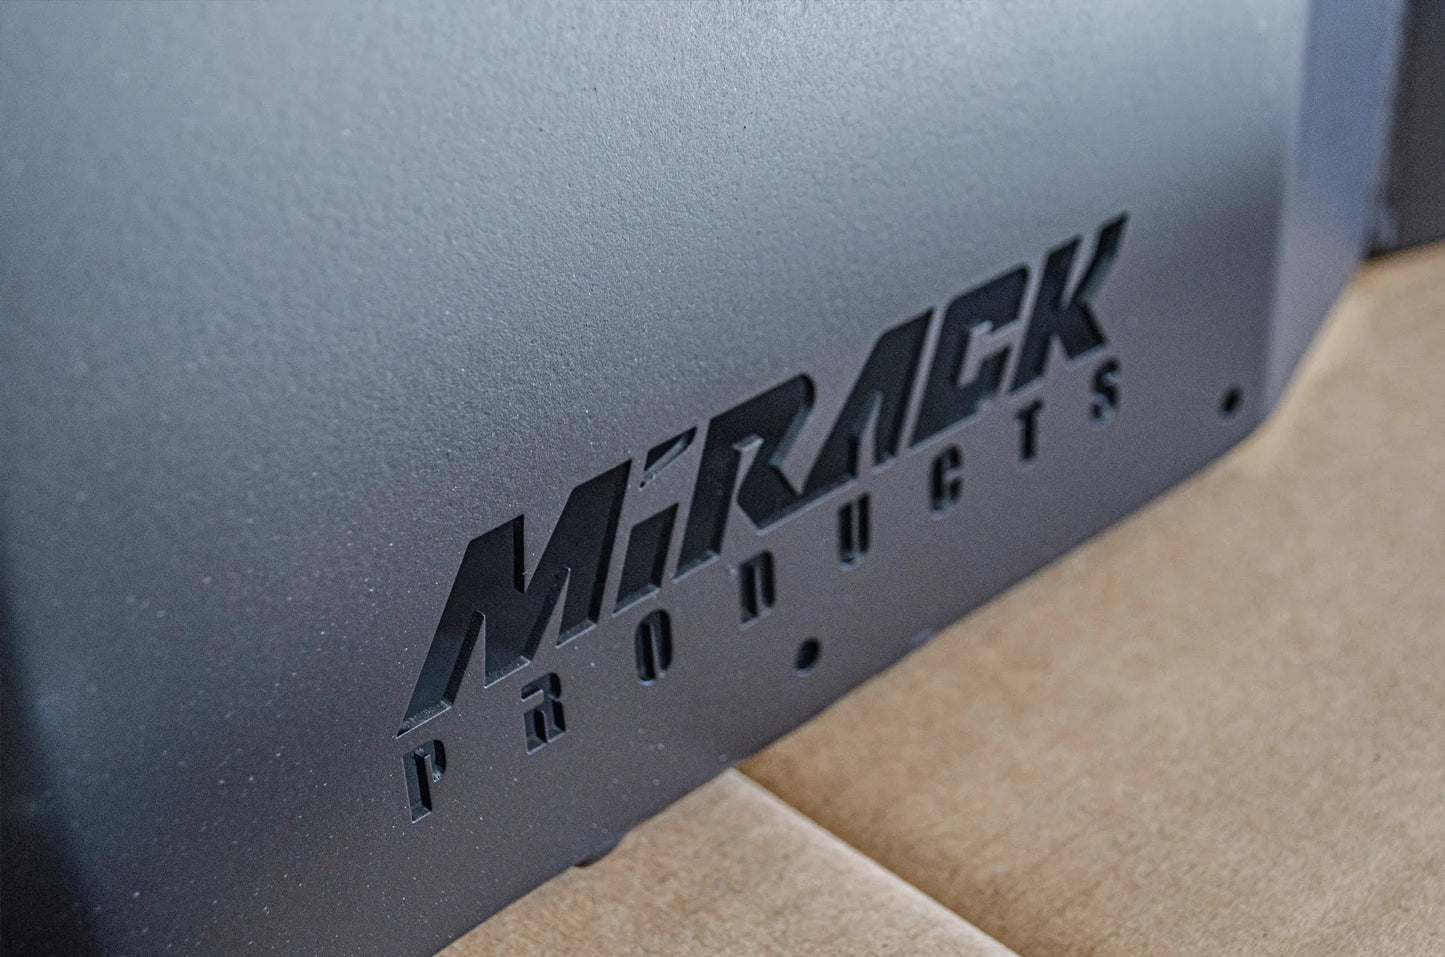 Mirack's robust steel frame and laser-cut logo add strength and elegance to your jerry can storage.